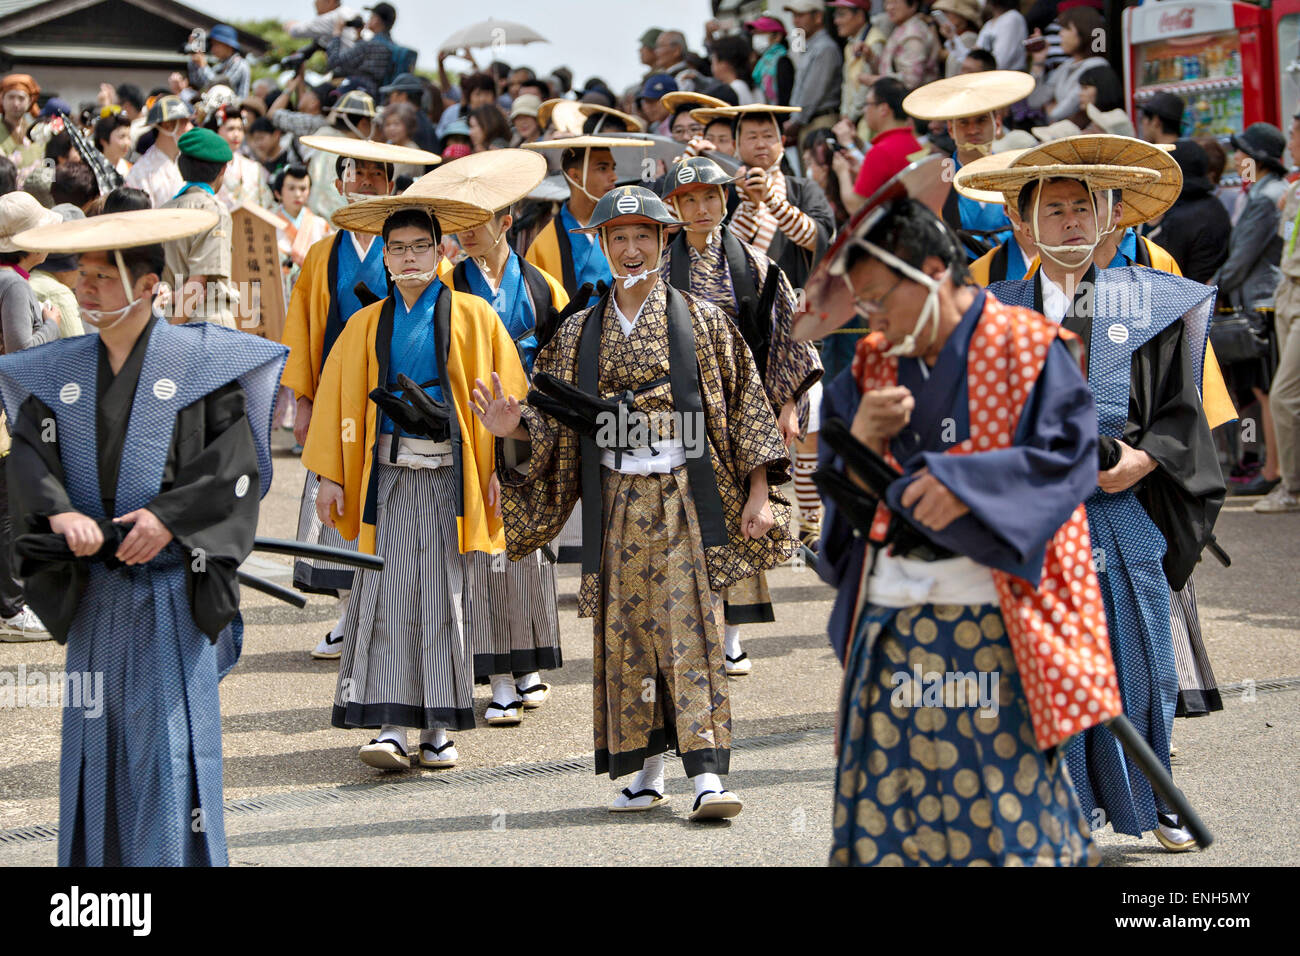 Japanese men dressed in traditional period costume take part in a procession that reenacts the return of the daimyo and his entourage from the capital of Japan during the Annual Kintai kyo Bridge Festival April 29, 2015 in Iwakuni, Yamaguchi, Japan. Stock Photo